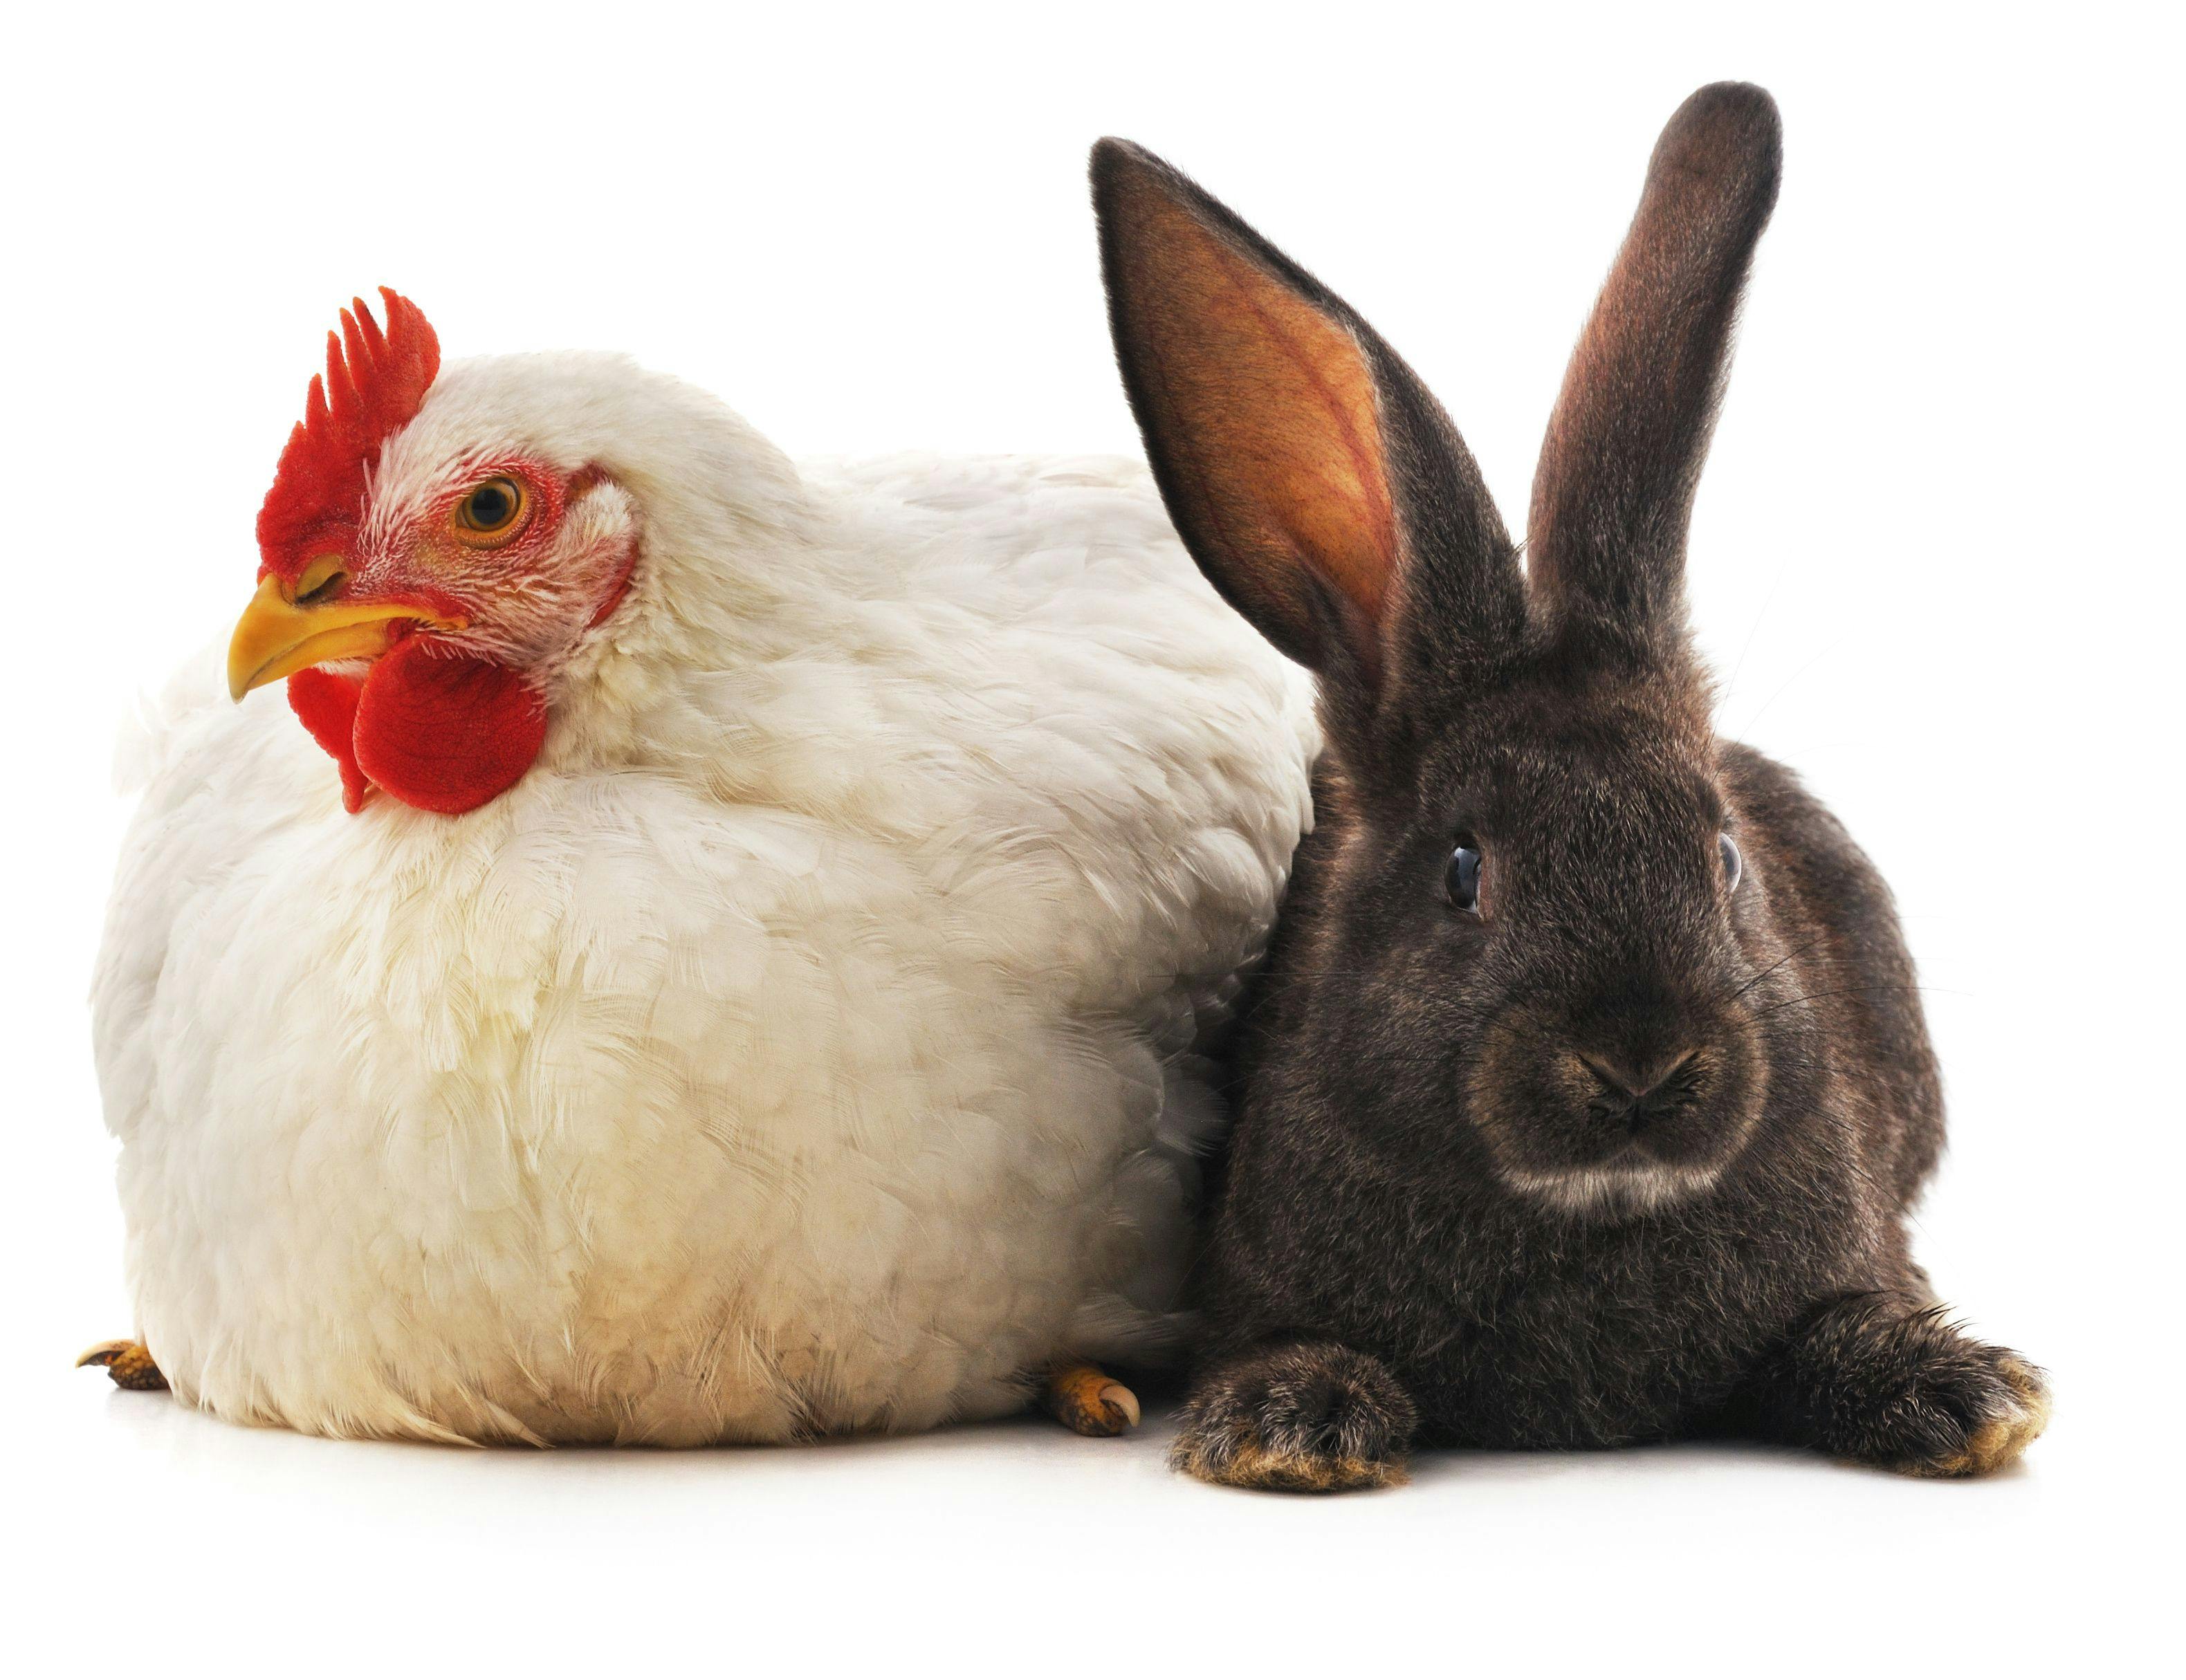 Global list of essential veterinary medicines for food-producing animals in need of rabbit and poultry specialists 